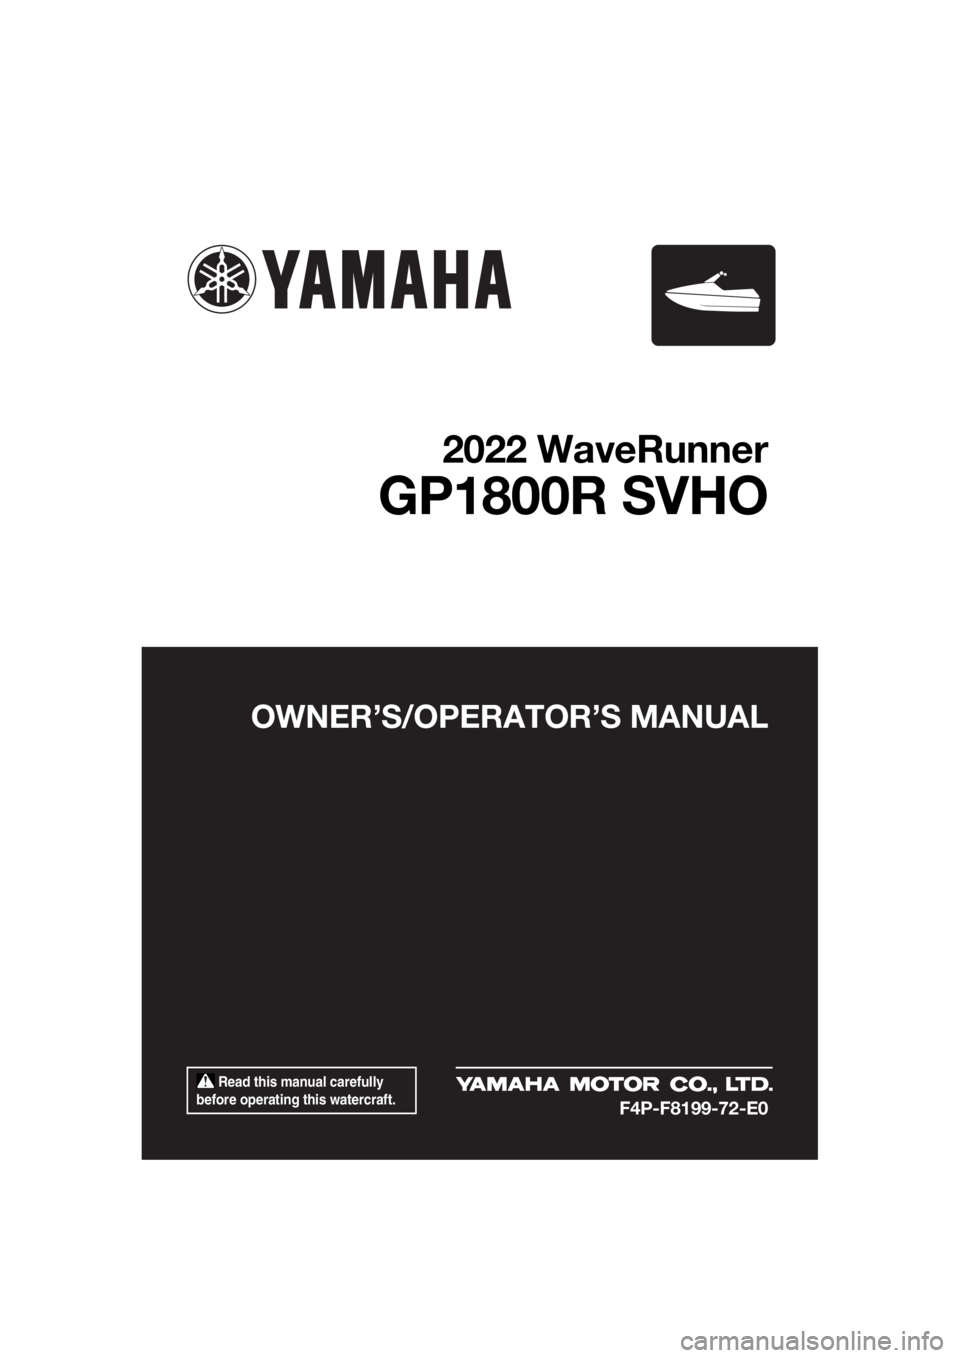 YAMAHA GP1800R SVHO 2022  Owners Manual  Read this manual carefully 
before operating this watercraft.
OWNER’S/OPERAT OR’S MANUAL
2022 WaveRunner
GP1800R SVHO
F4P-F8199-72-E0
UF4P72E0.book  Page 1  Tuesday, August 24, 2021  3:18 PM 